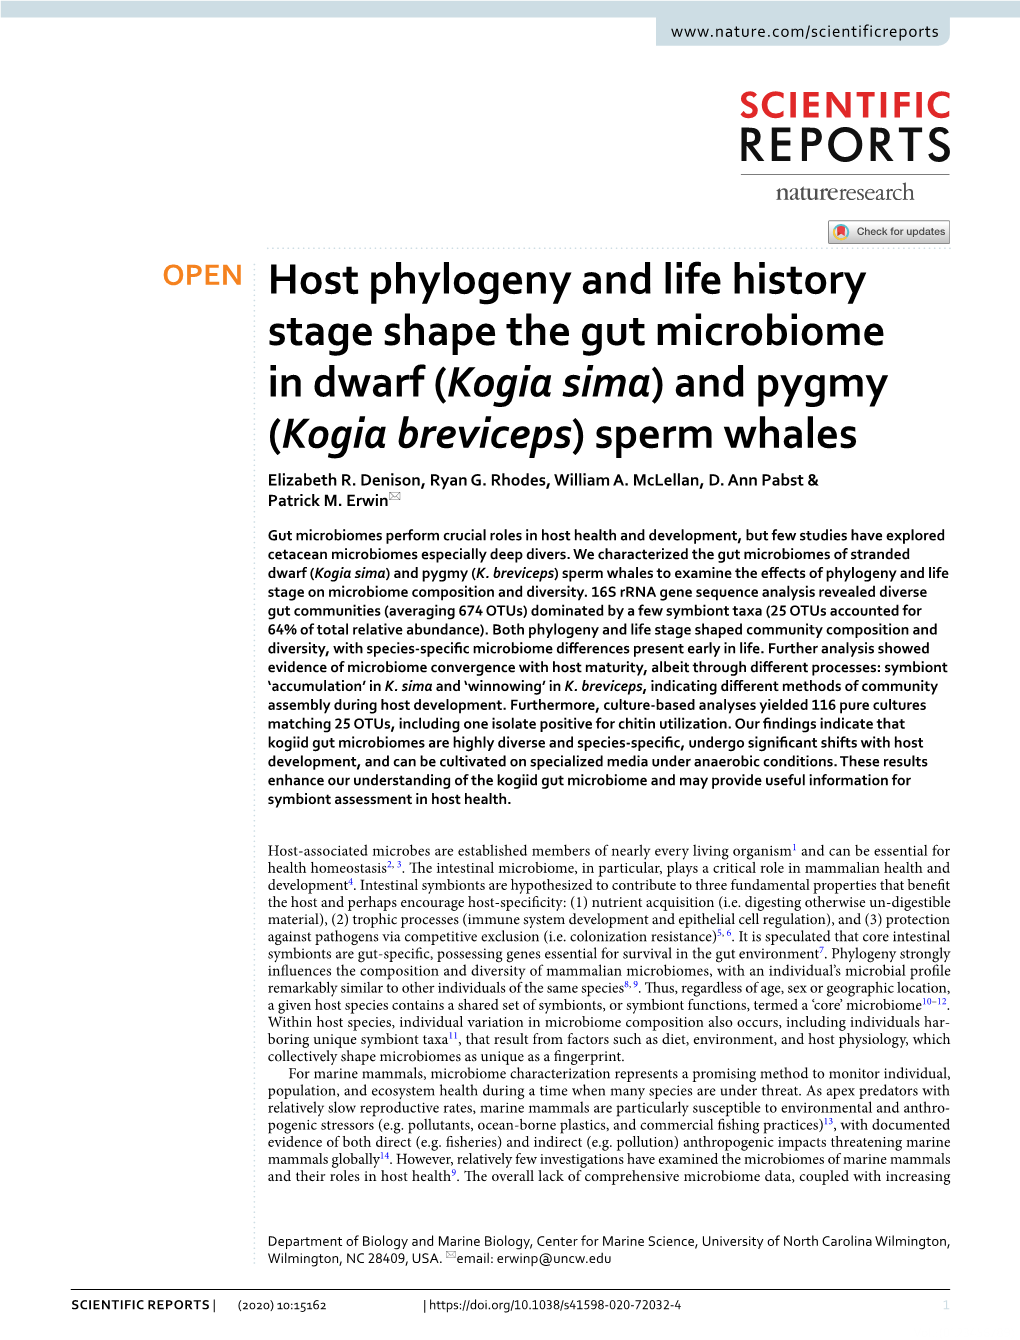 Host Phylogeny and Life History Stage Shape the Gut Microbiome in Dwarf (Kogia Sima) and Pygmy (Kogia Breviceps) Sperm Whales Elizabeth R